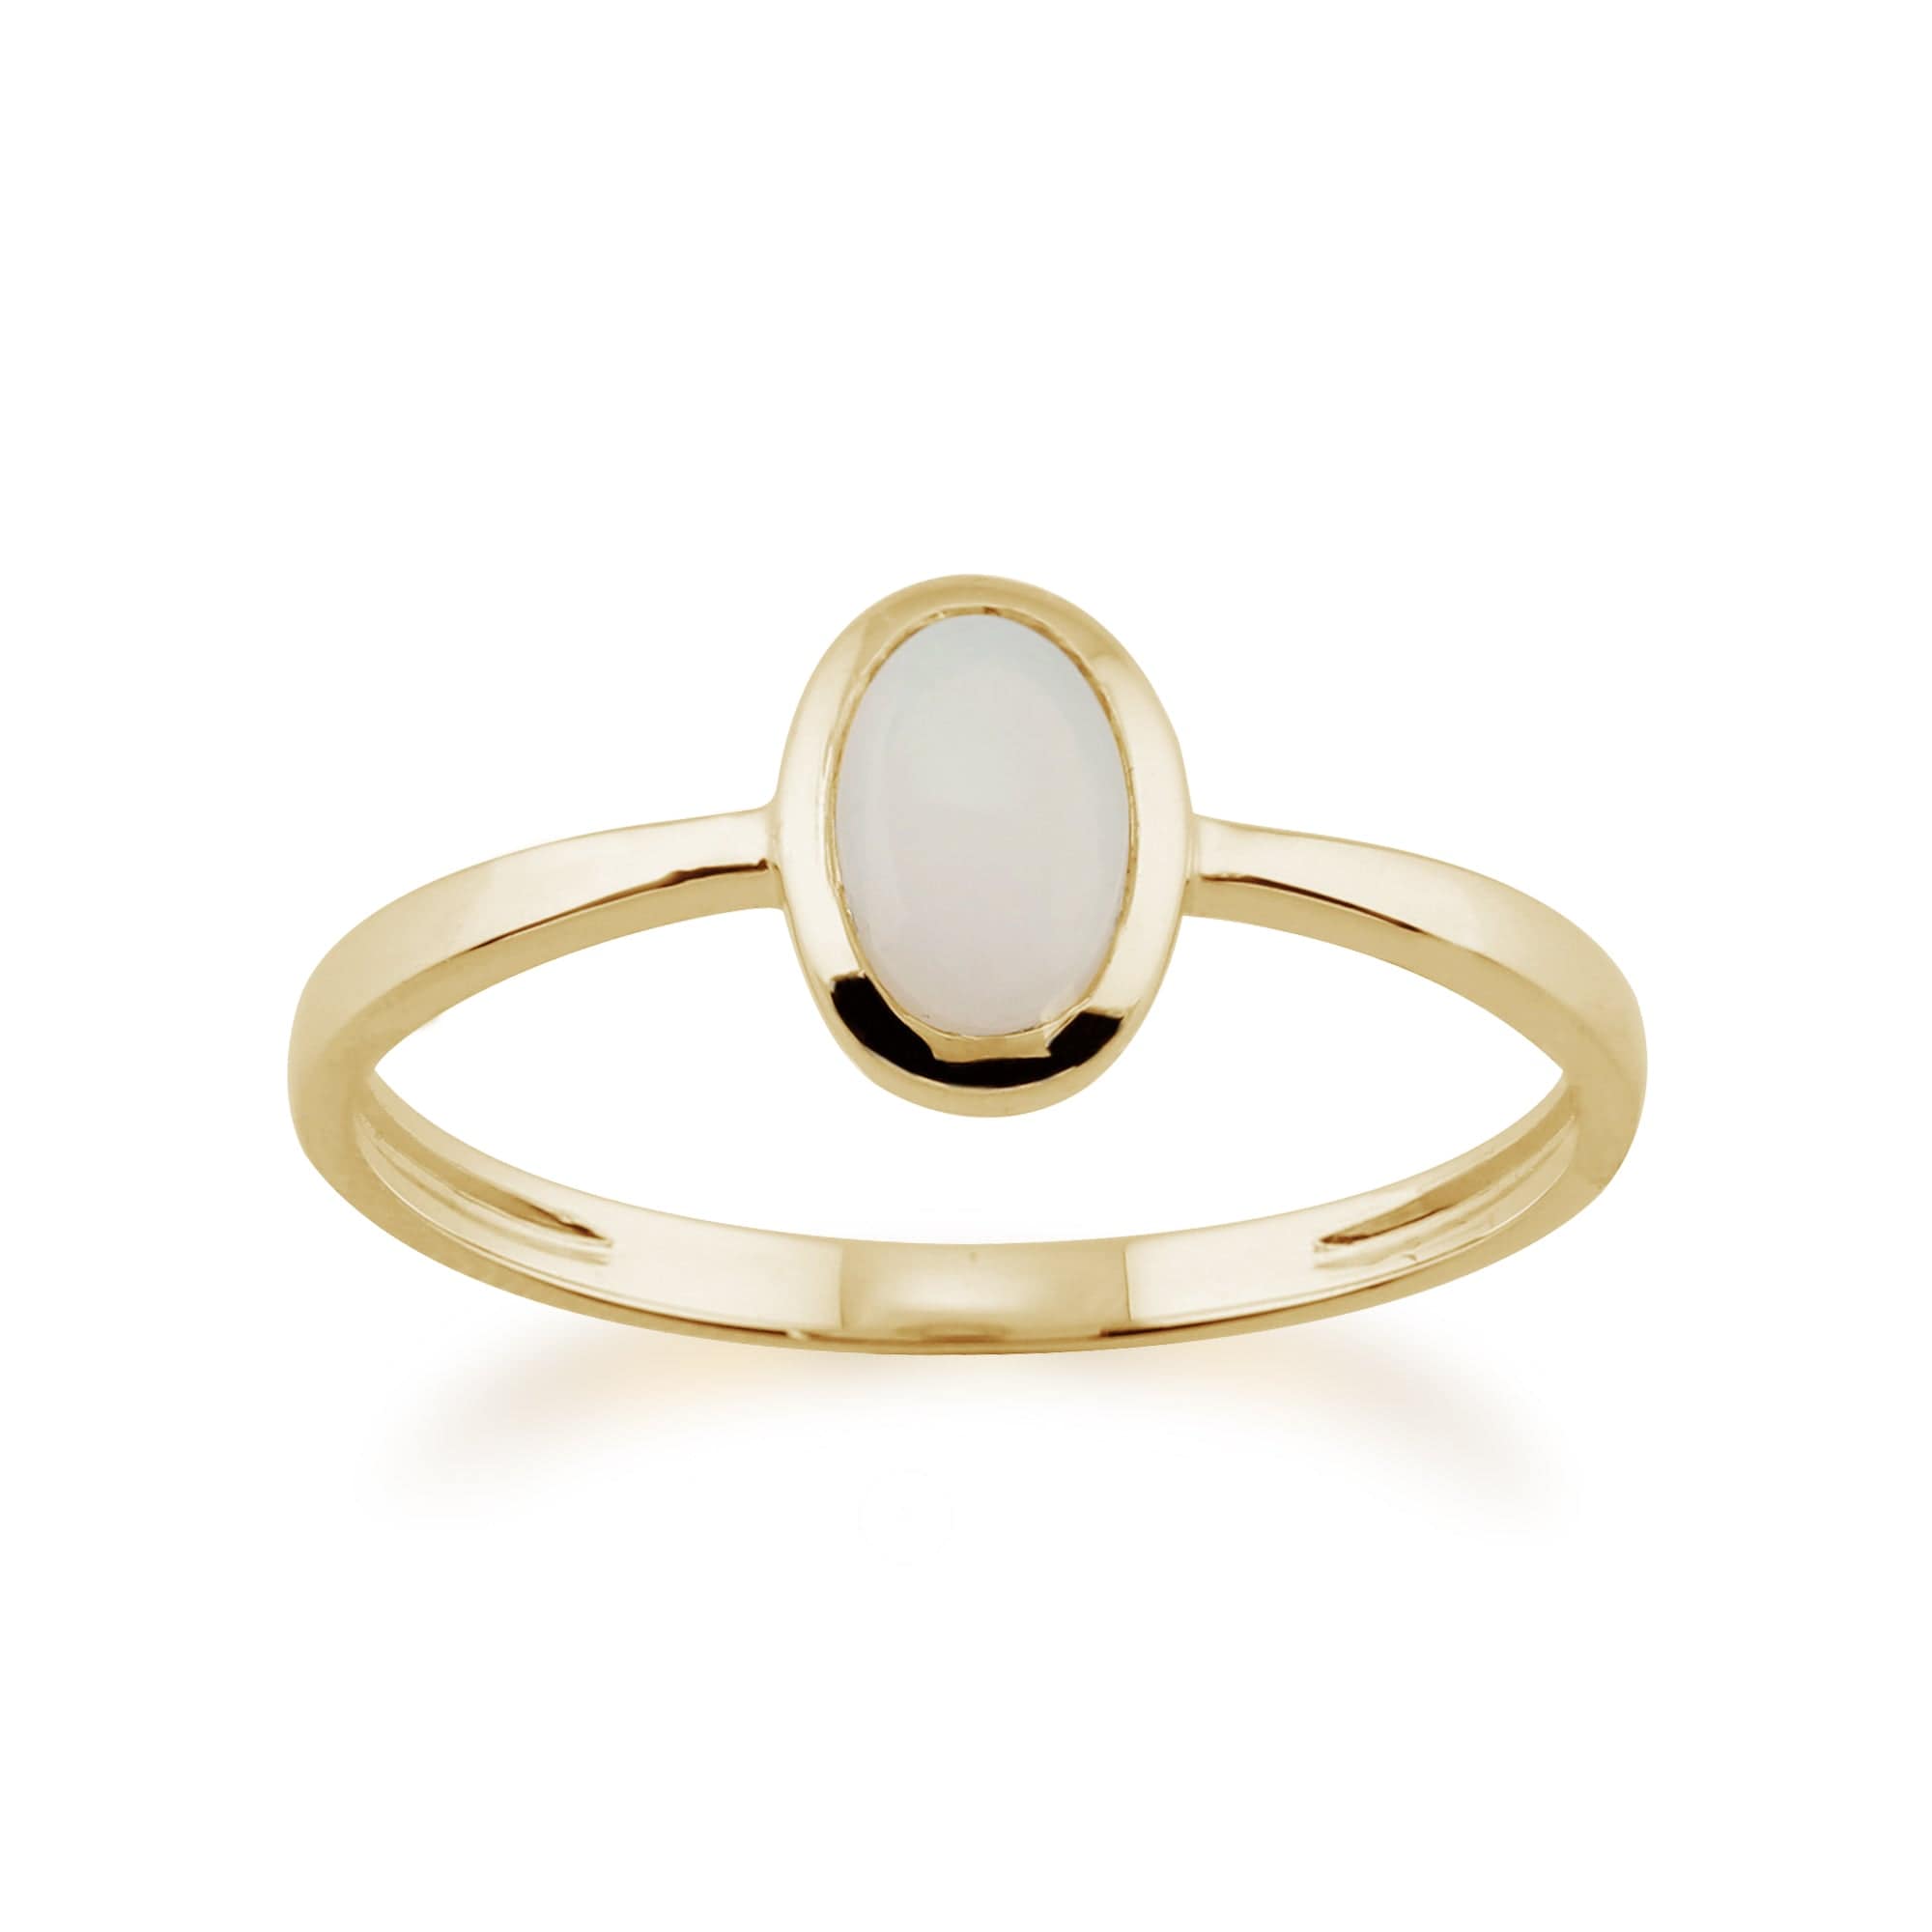 Oval Opal Ring in 9ct Gold